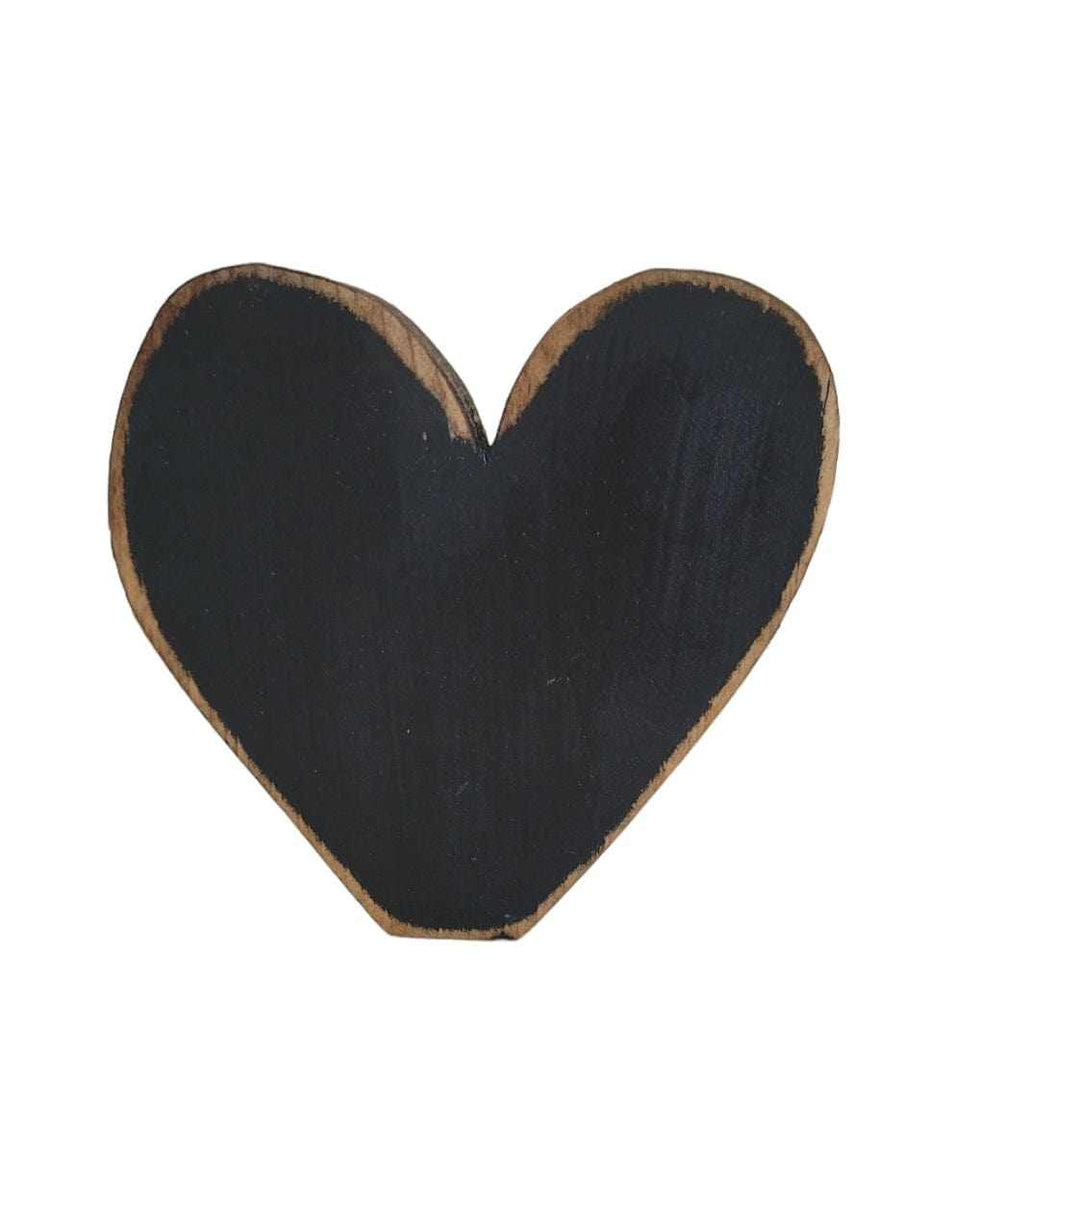 Atlantic Wood N Wares Home Decor>Decorations>Hearts Black / Each Handcrafted Wooden Hearts: Perfect Gift for Loved Ones HeartSet0010